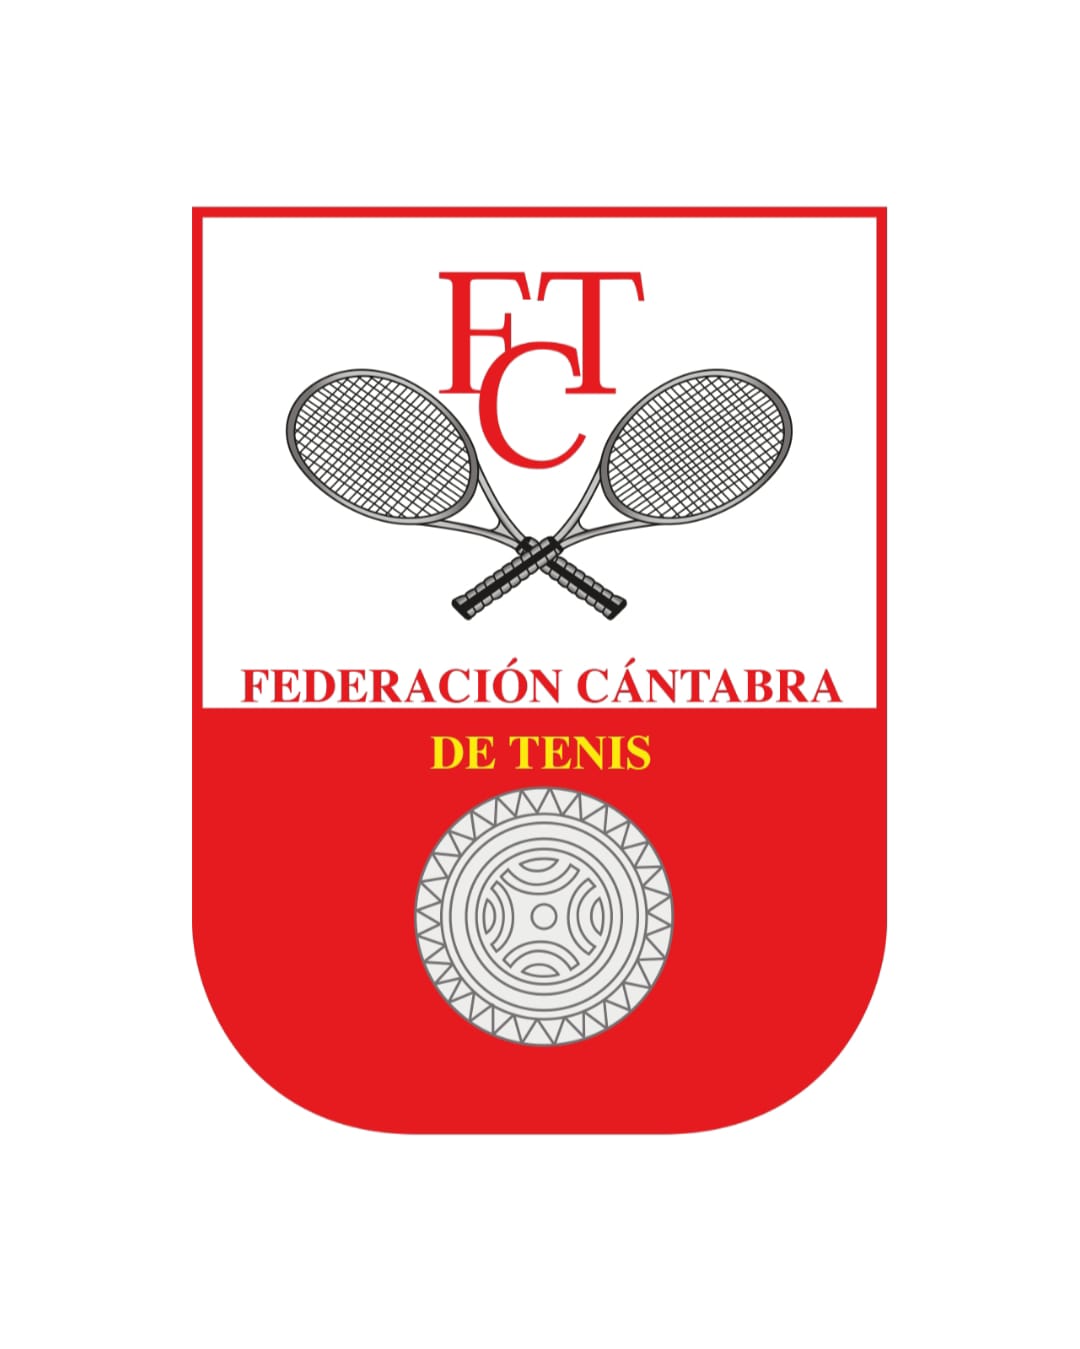 Article on the website of the Cantabrian Tennis Federation